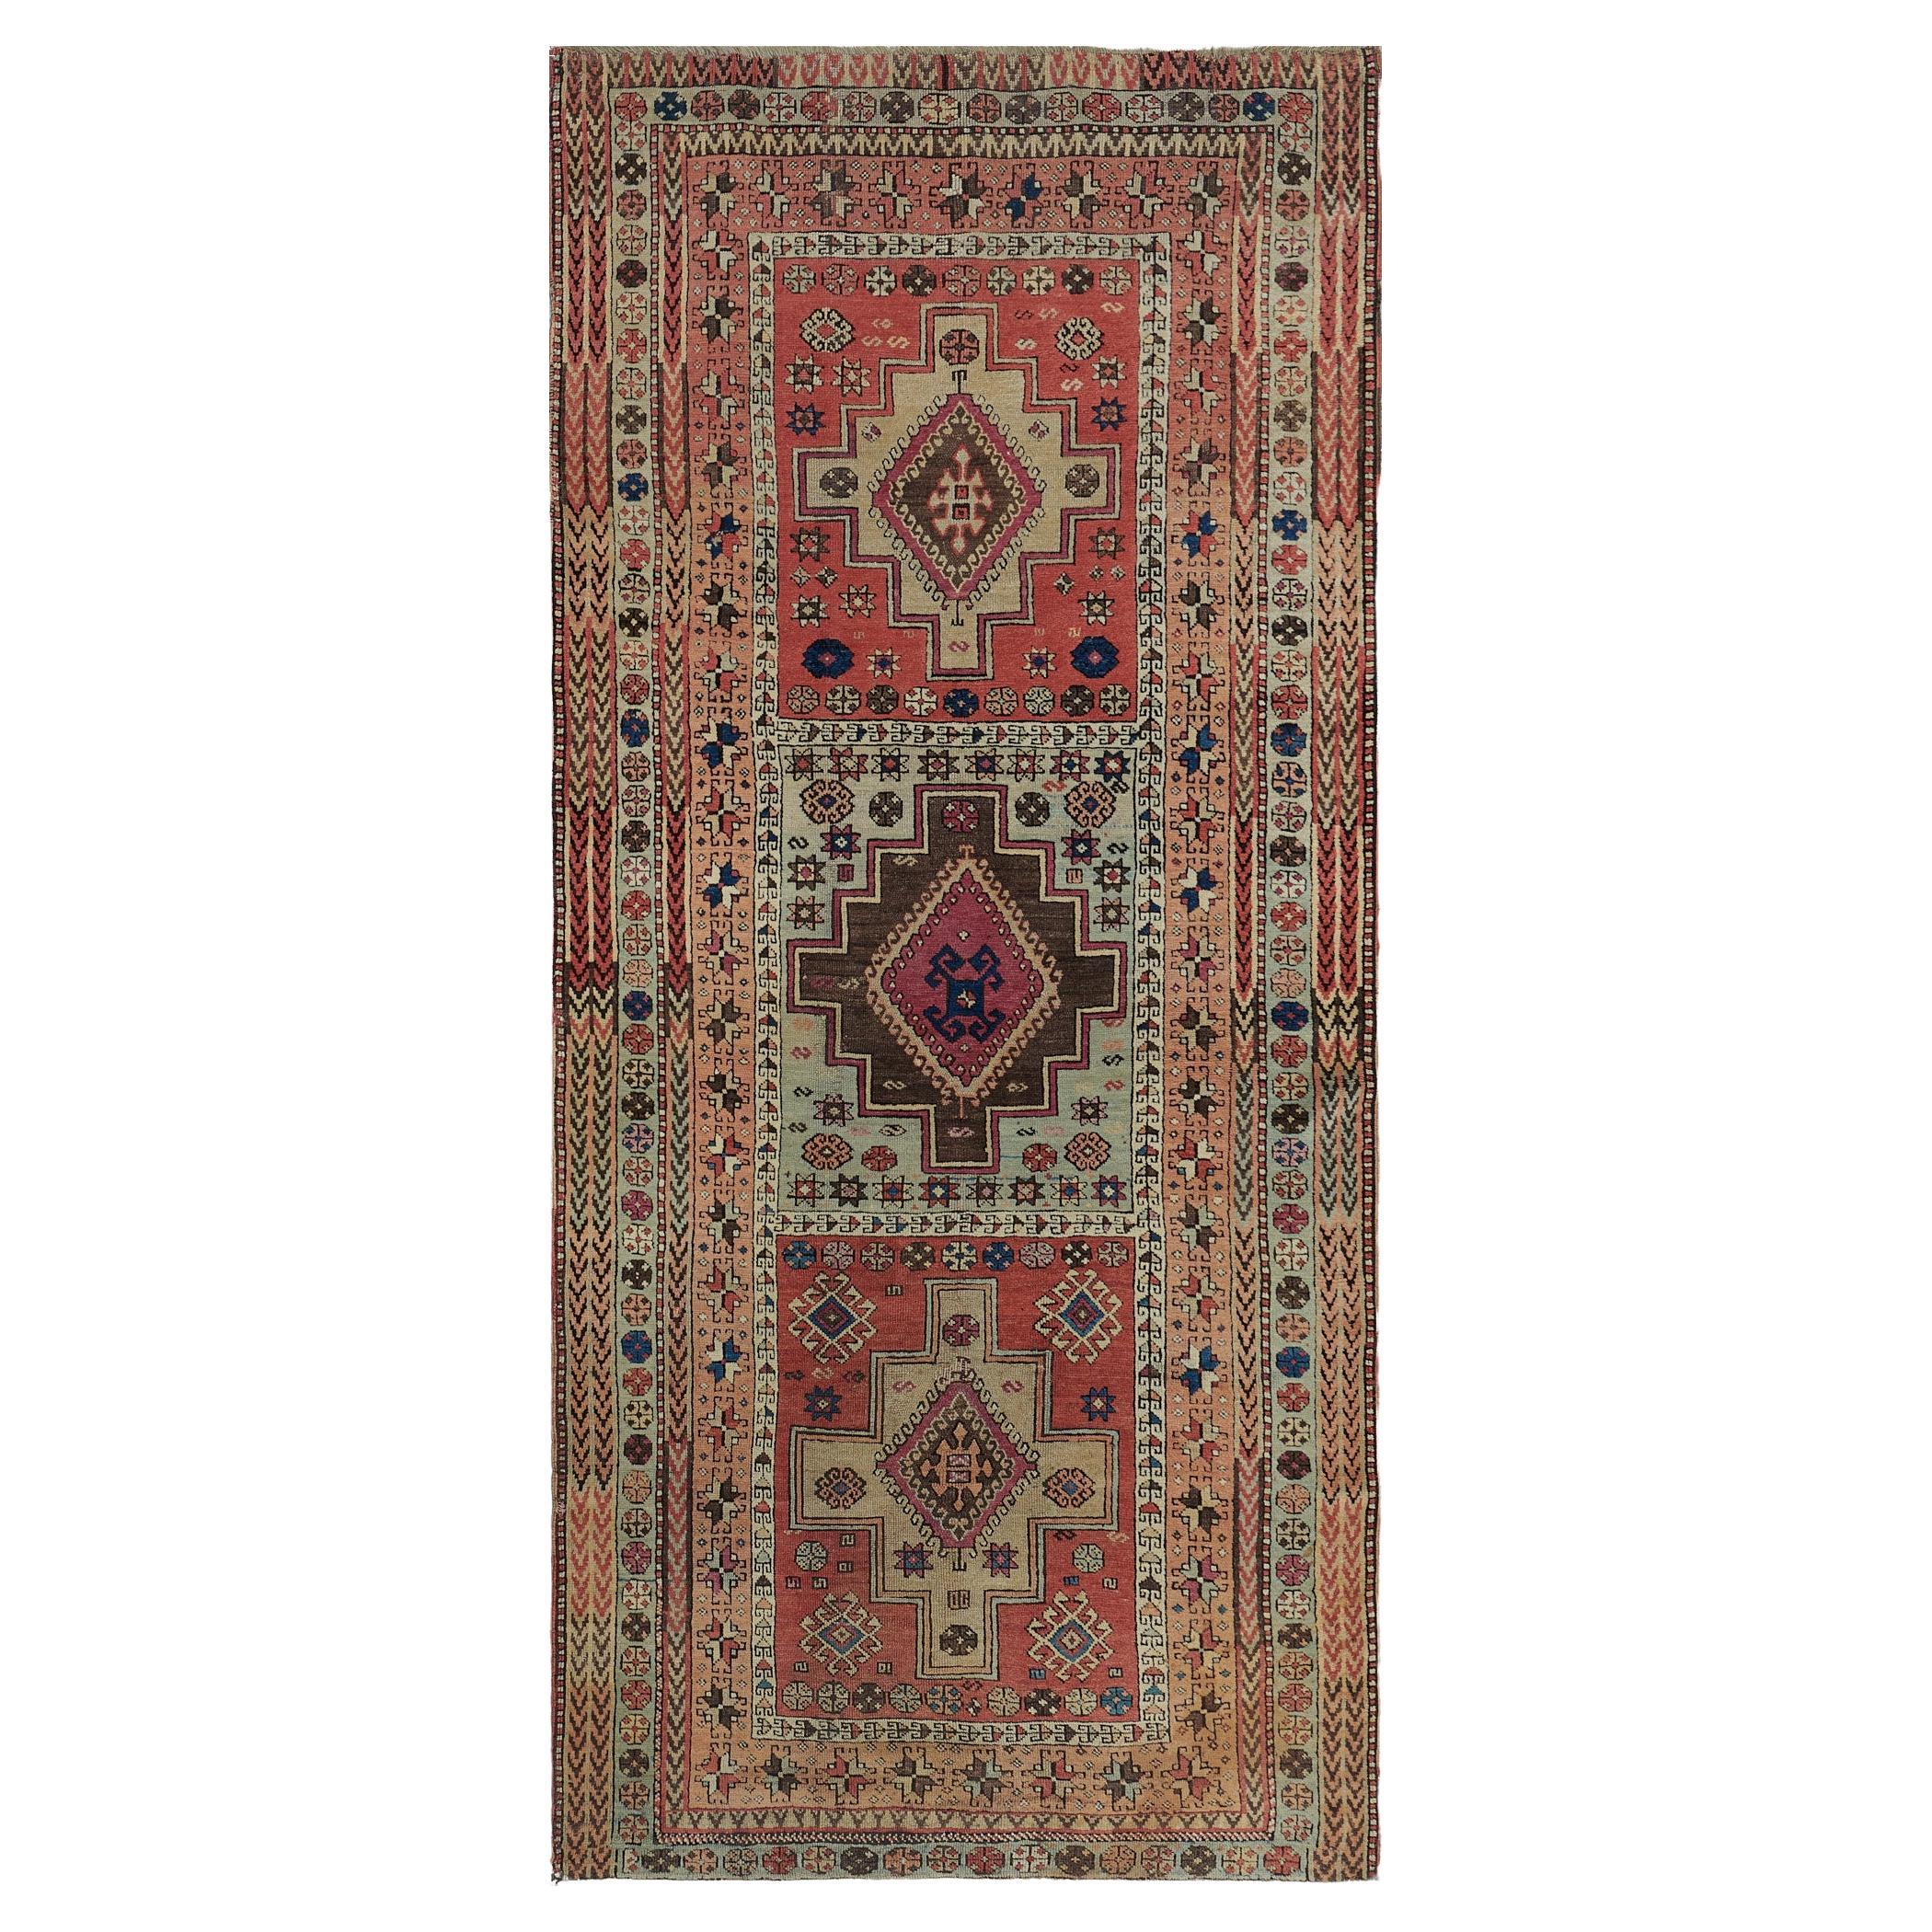 Antique Hand-Knotted Wool Traditional Karabagh Runner, c. 1880